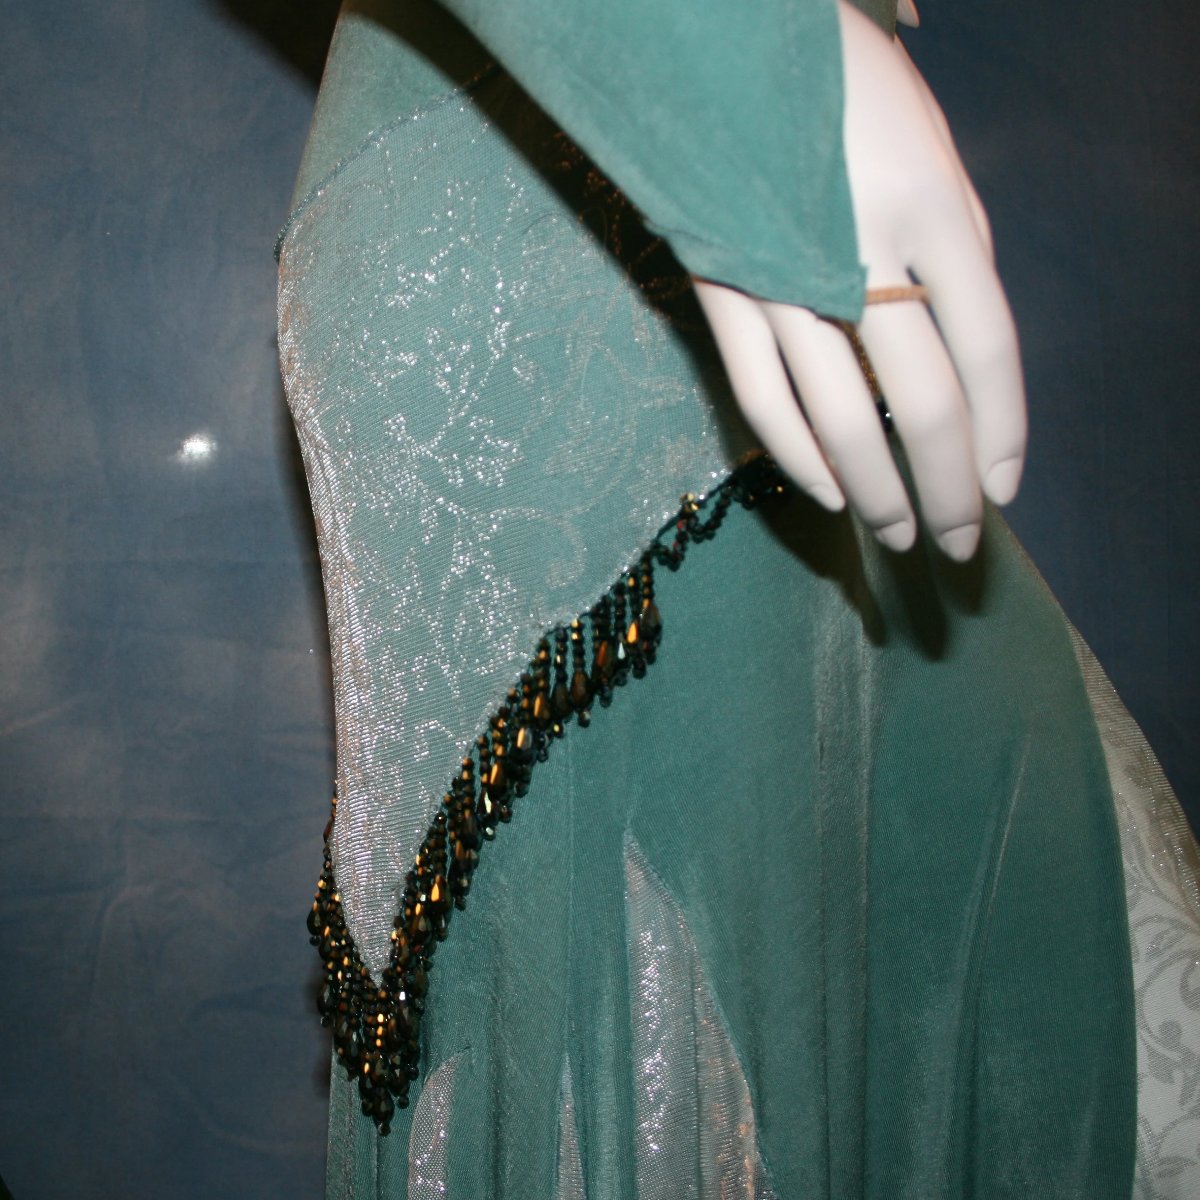 close detail view of Aqua social ballroom dress created in luxurious aqua solid slinky fabric with aqua iridescent sheer insets, embellished with hand beading of Swarovski beads on hip sash. Very full around bottom...can be a beginner ballroom dancer smooth ballroom dress.